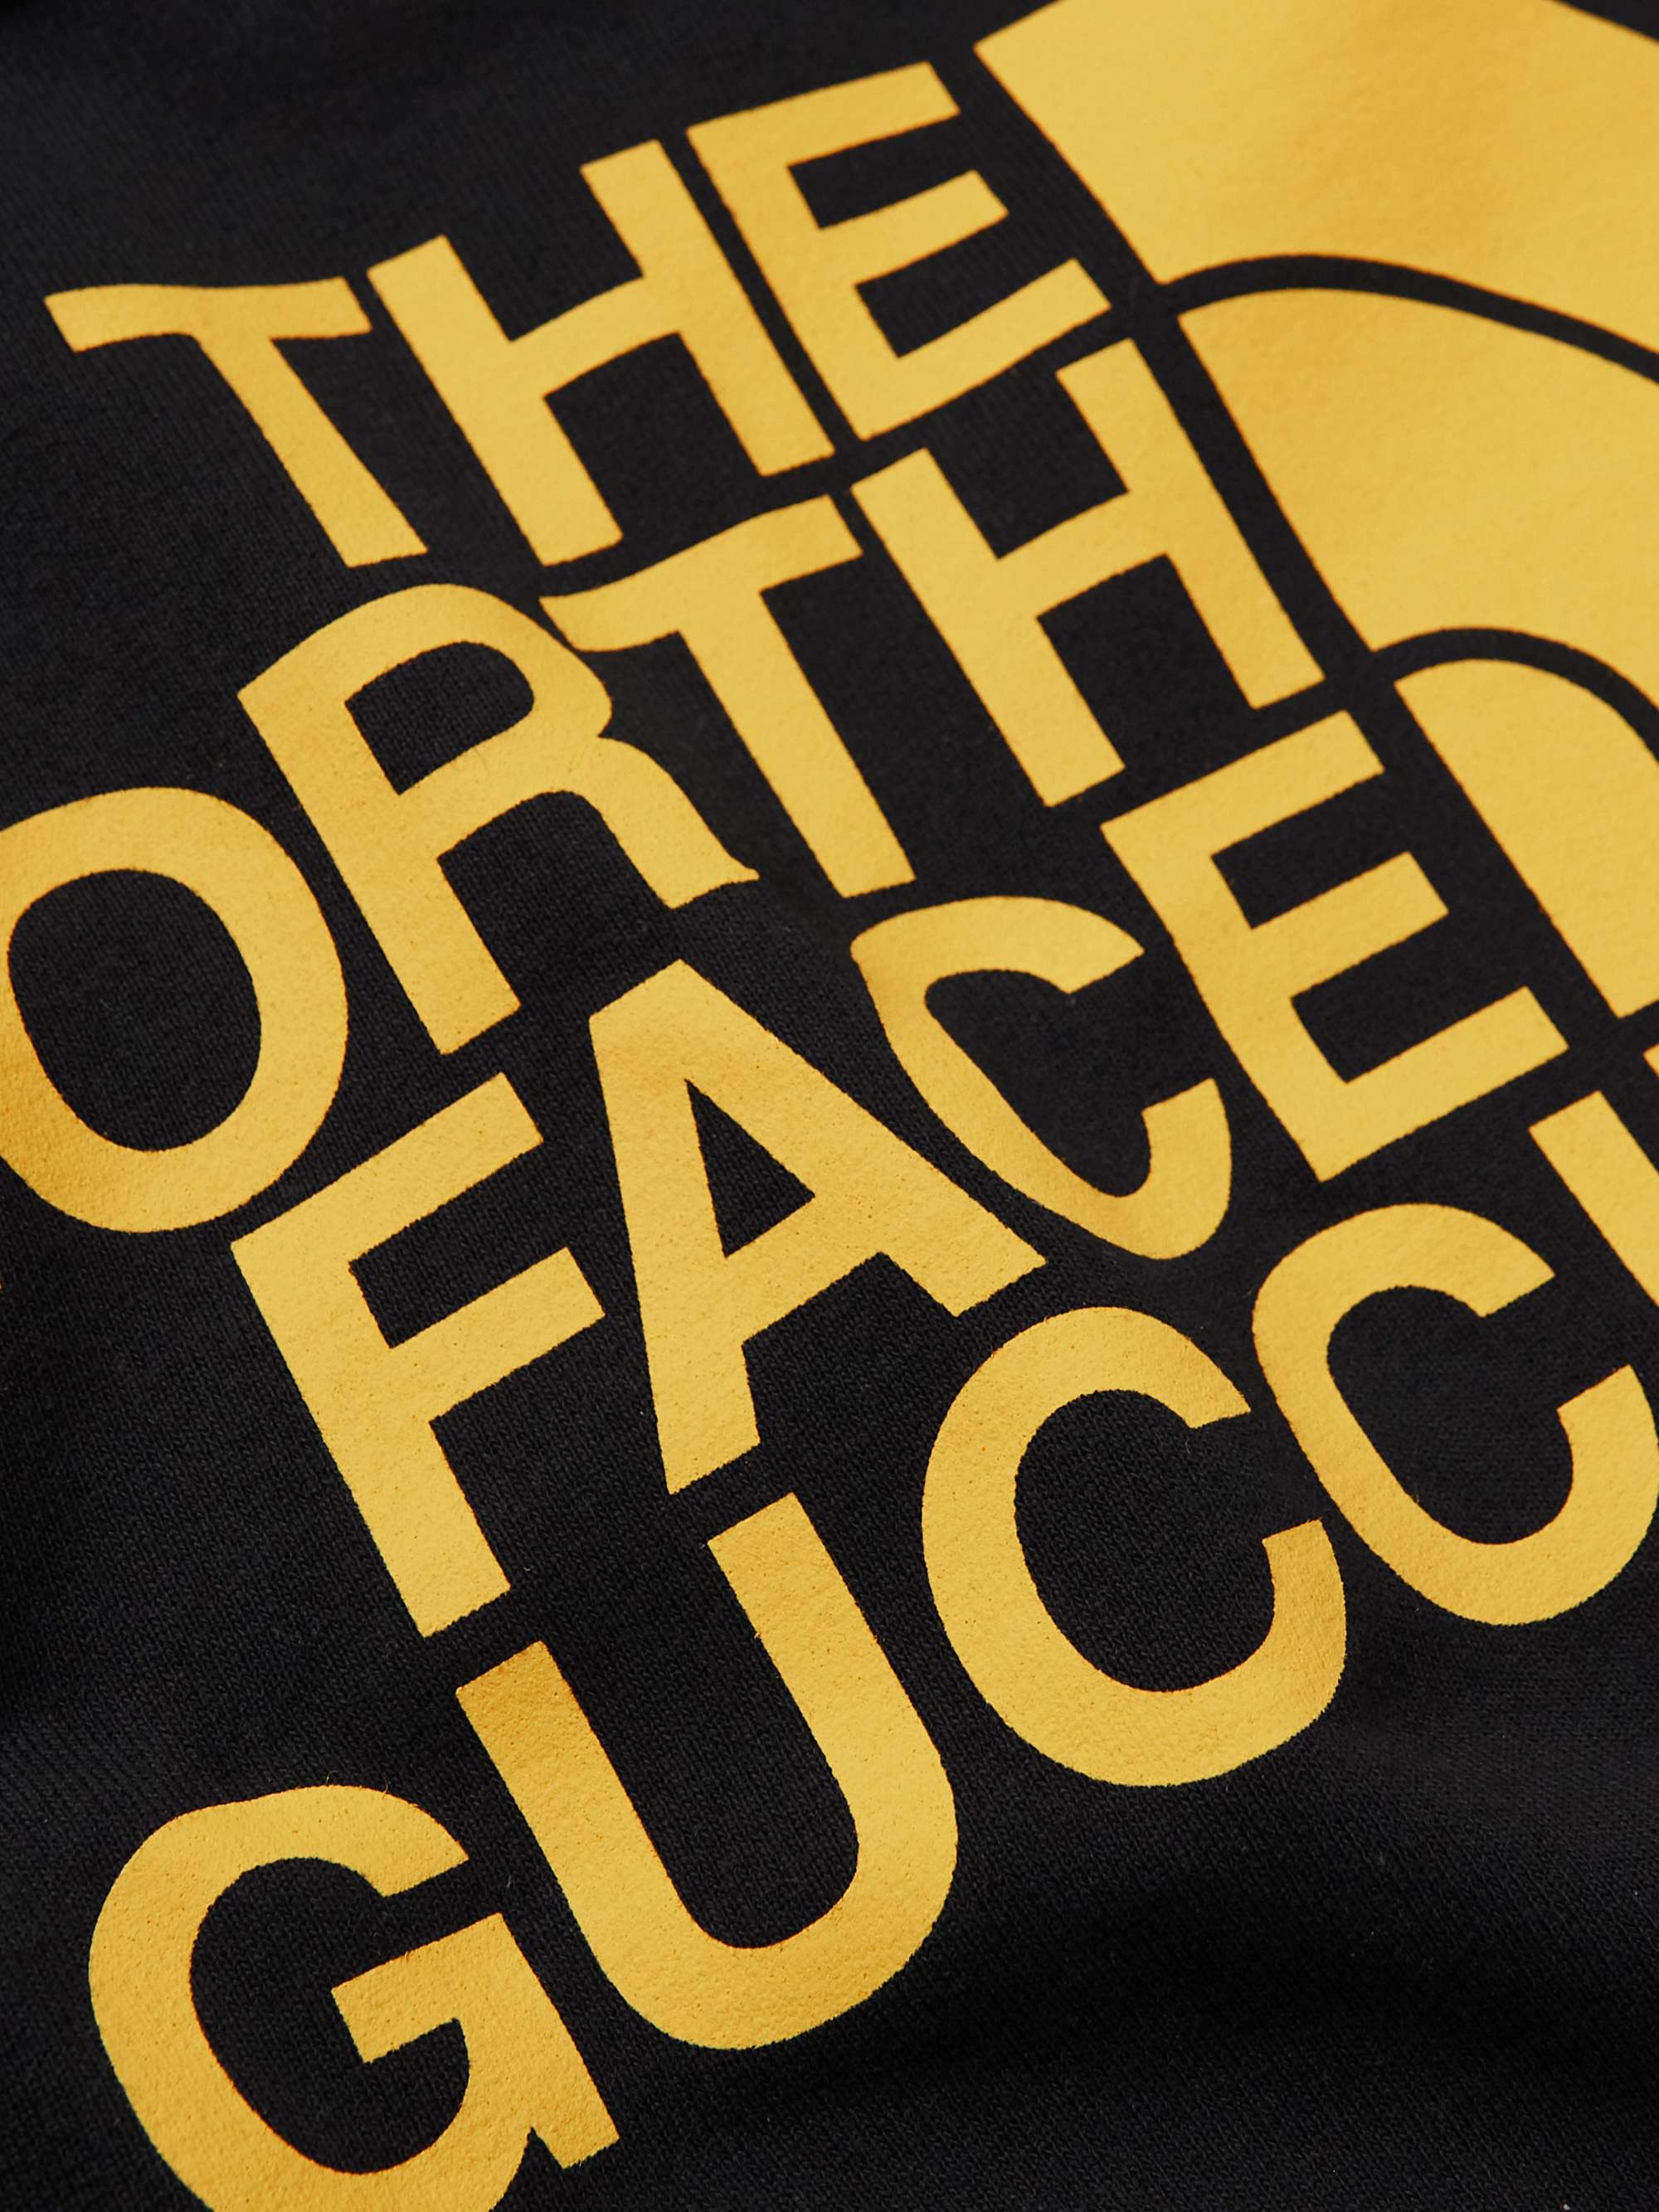 GUCCI + The North Face Logo-Print Cotton-Jersey Hoodie